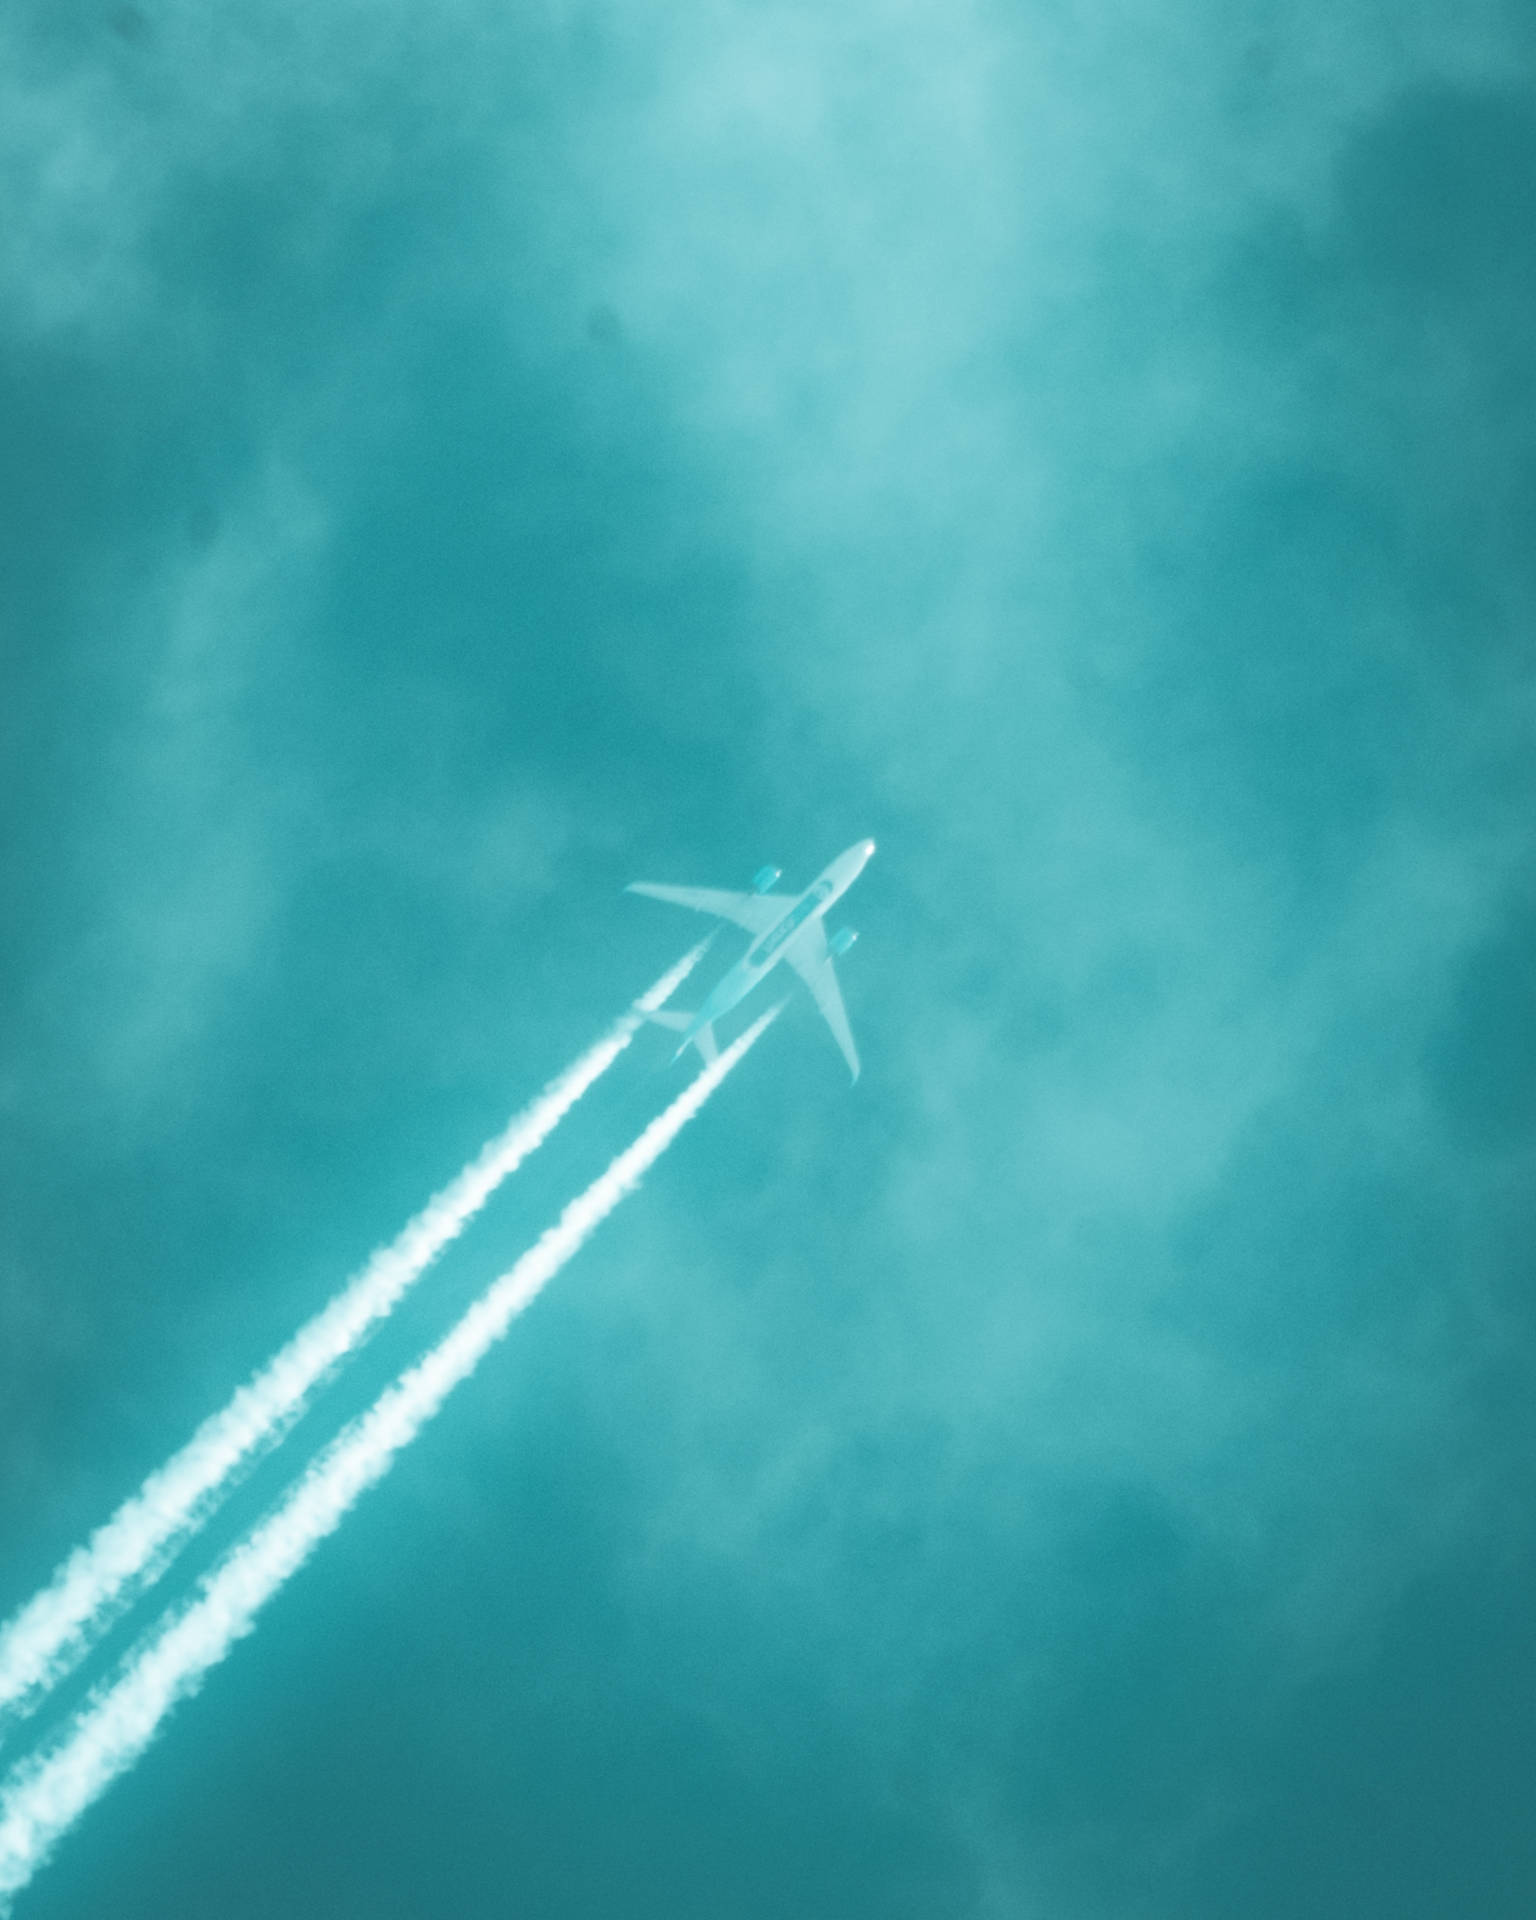 Teal Sky And Airplane Background